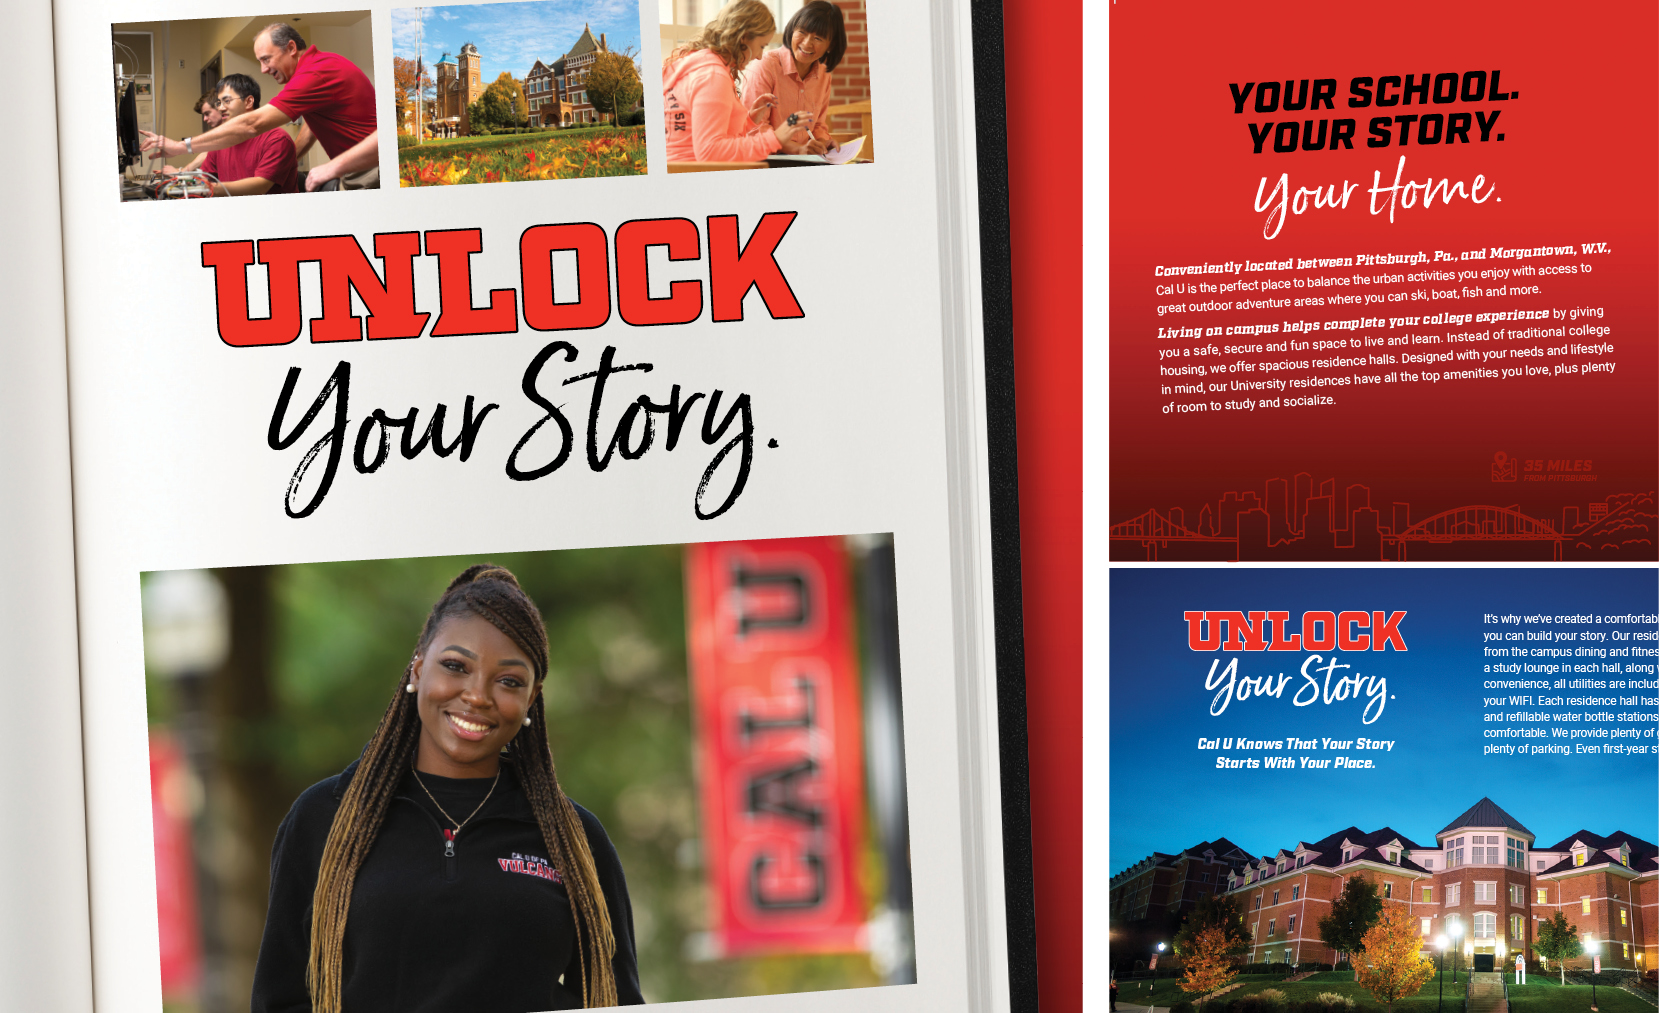 Unlock your story campaign